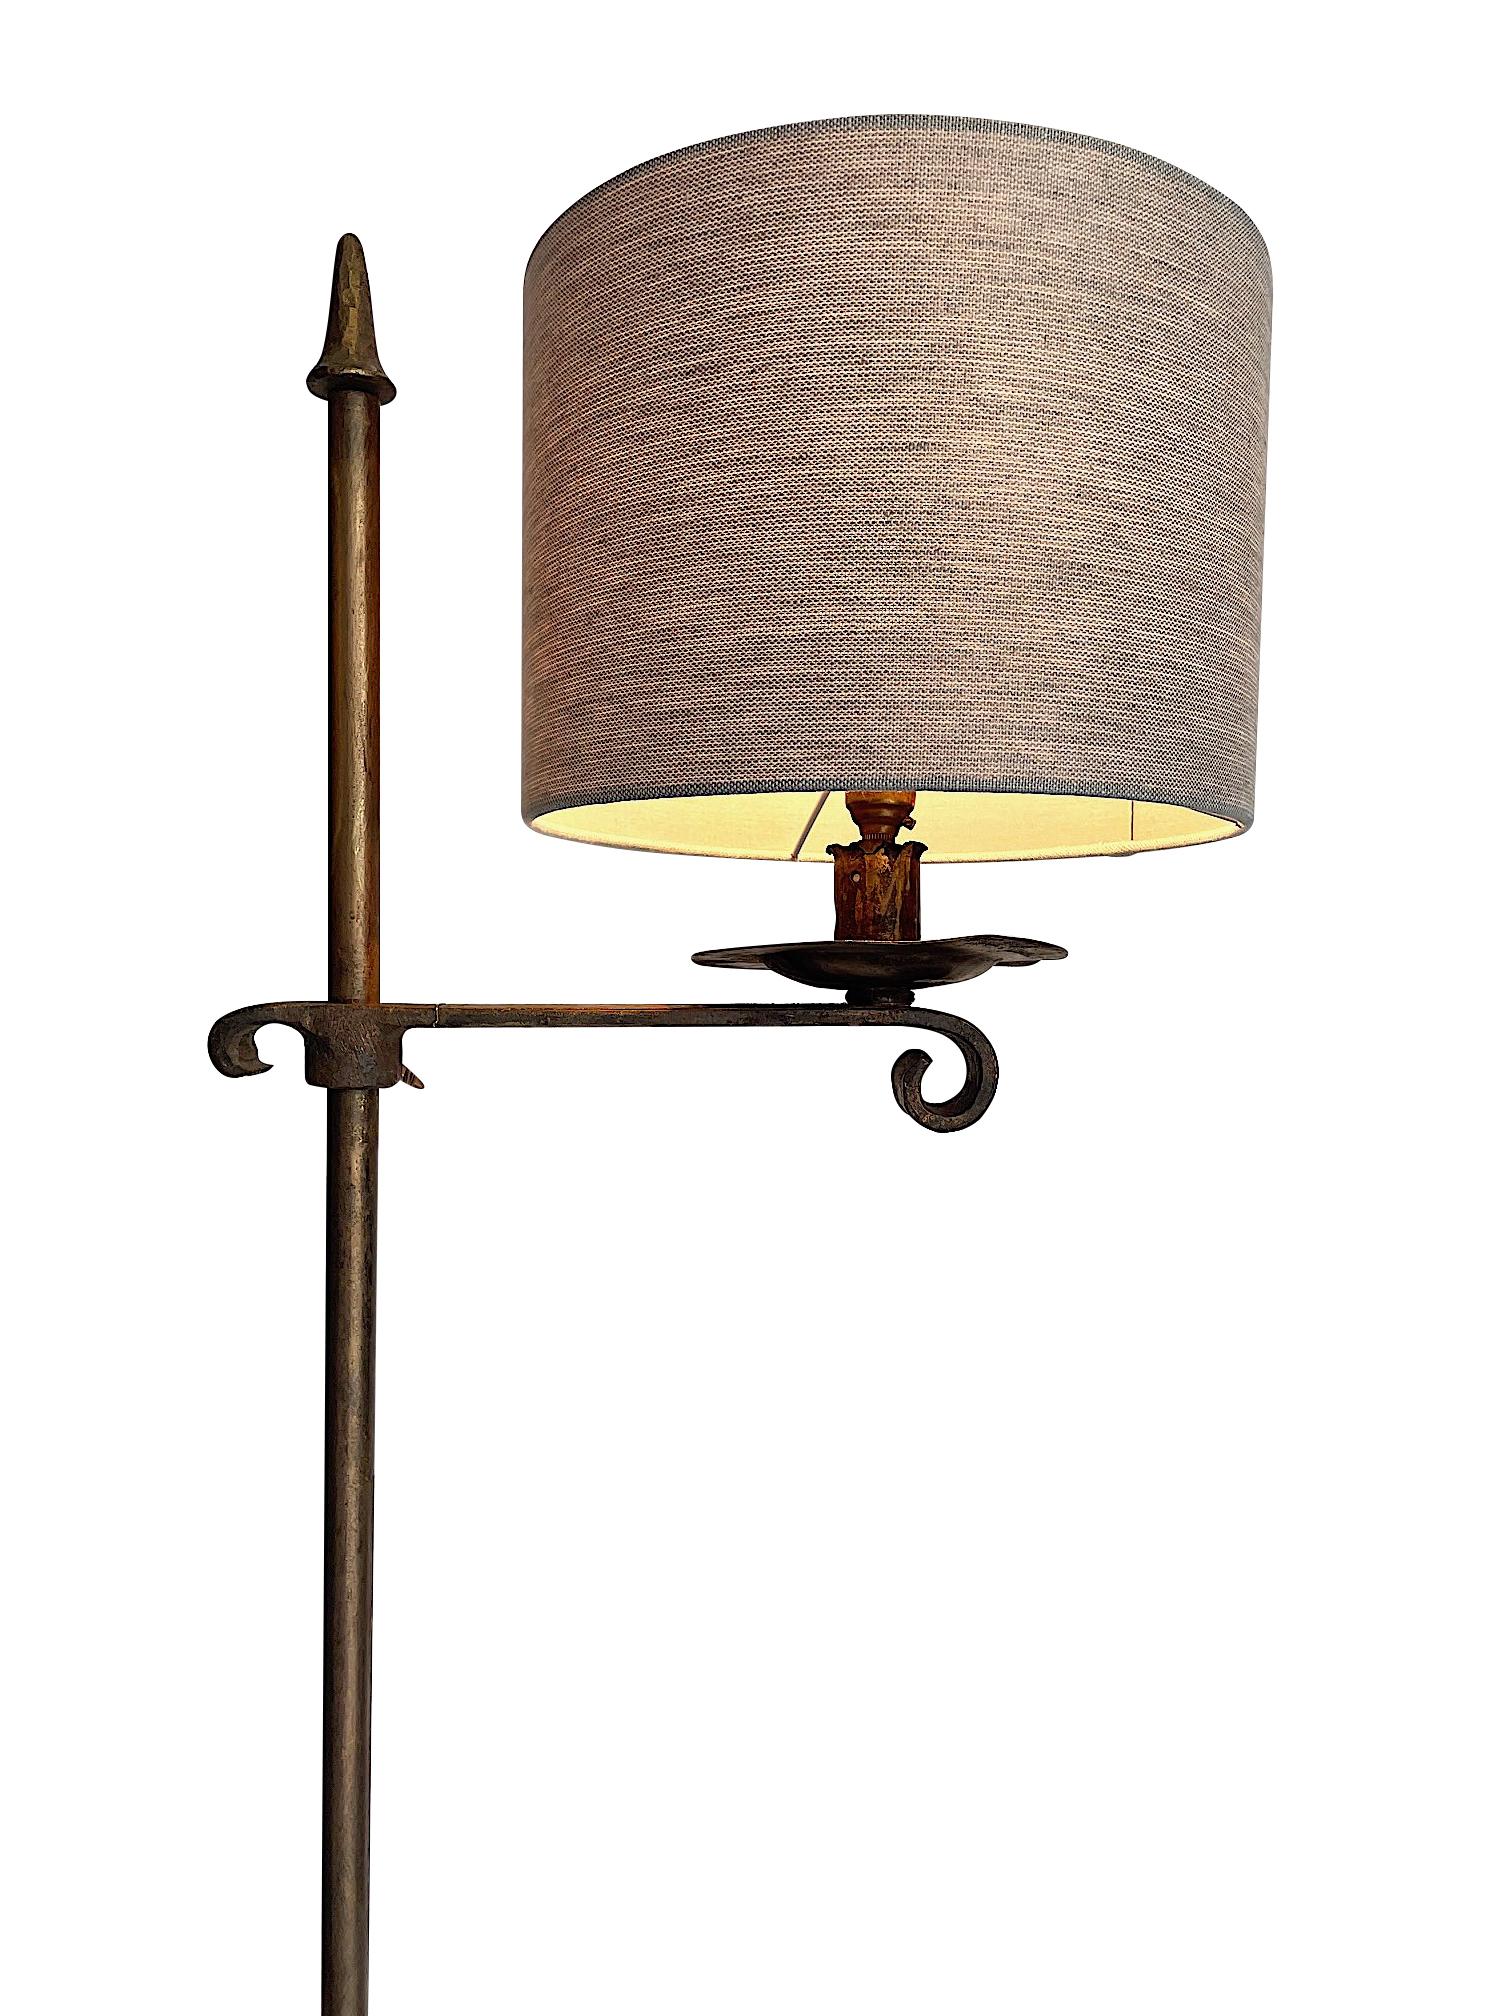 Mid-Century Modern 1950s Spanish Gilt Wrought Iron Adjustable Floor Lamp with Linen Shade  For Sale